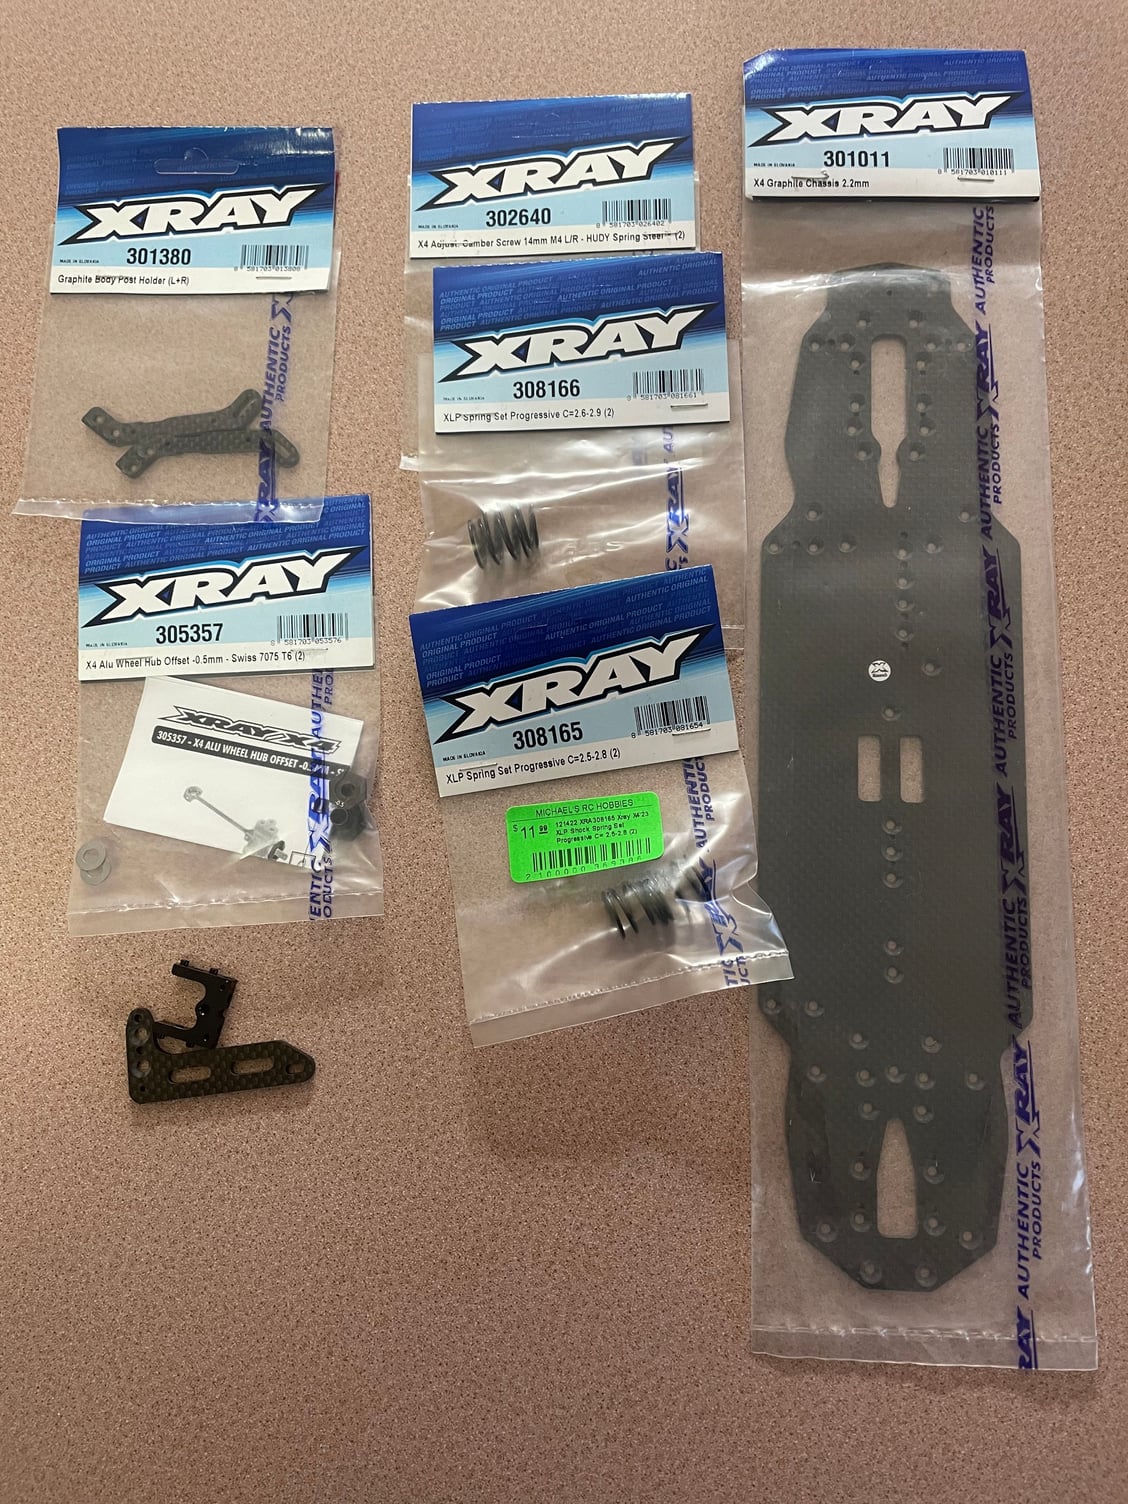 Xray x422 upgraded to a x423 and more - R/C Tech Forums